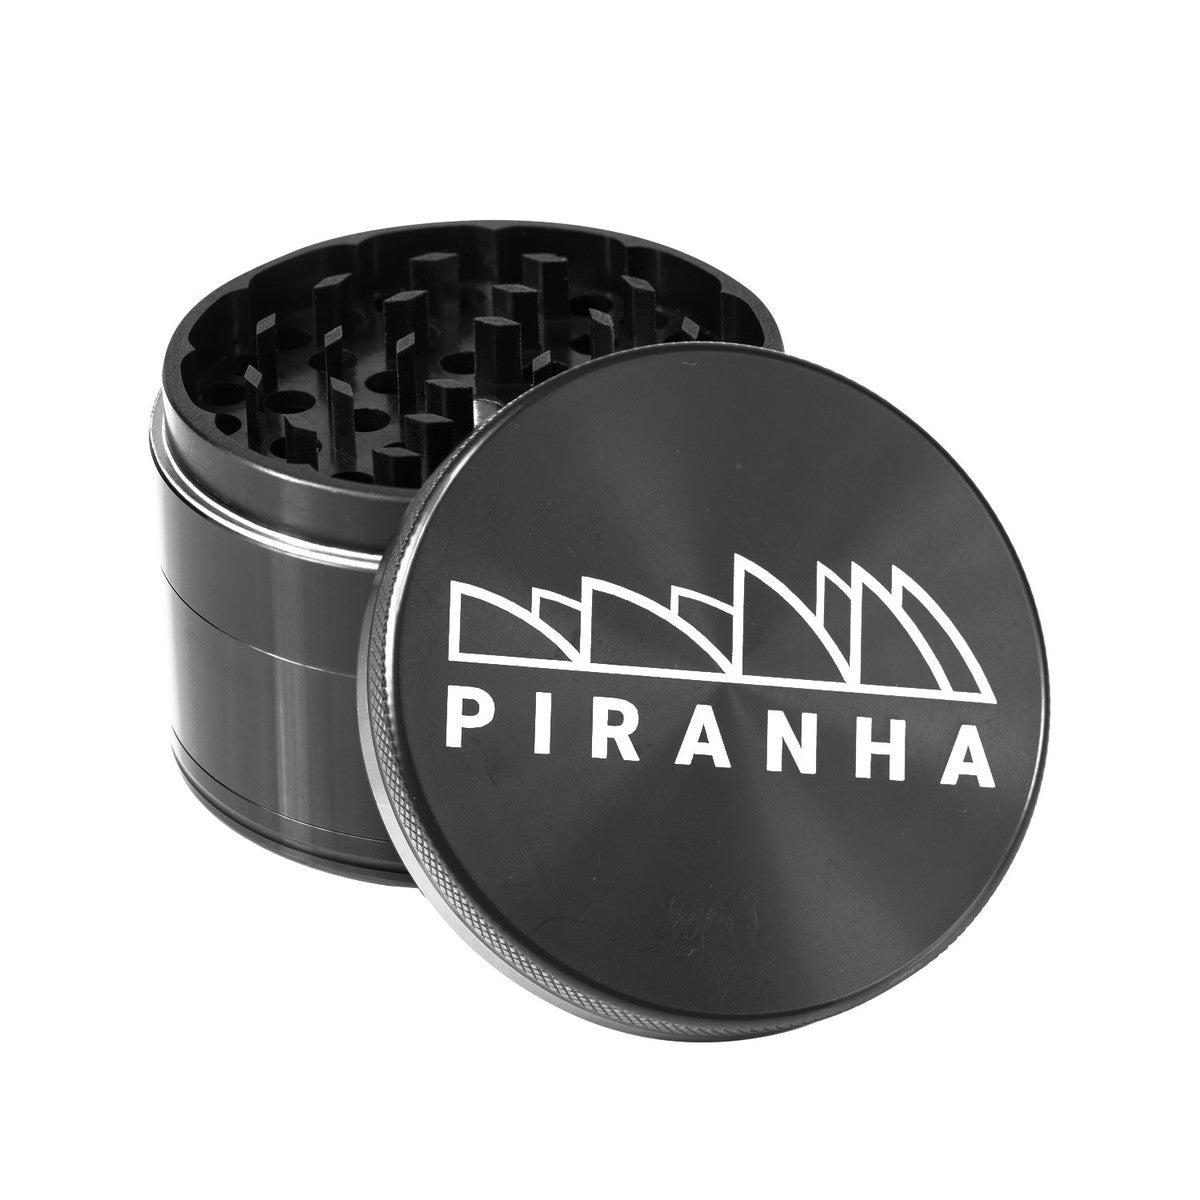 The 4-piece grinder always serves peak functionality. Featuring a strong magnetic lid, razor sharp teeth, a sifting and storage compartment, a screen at the bottom where kief is caught and stored, plus a pollen pick to collect and top off a bowl (or save for a rainy day).